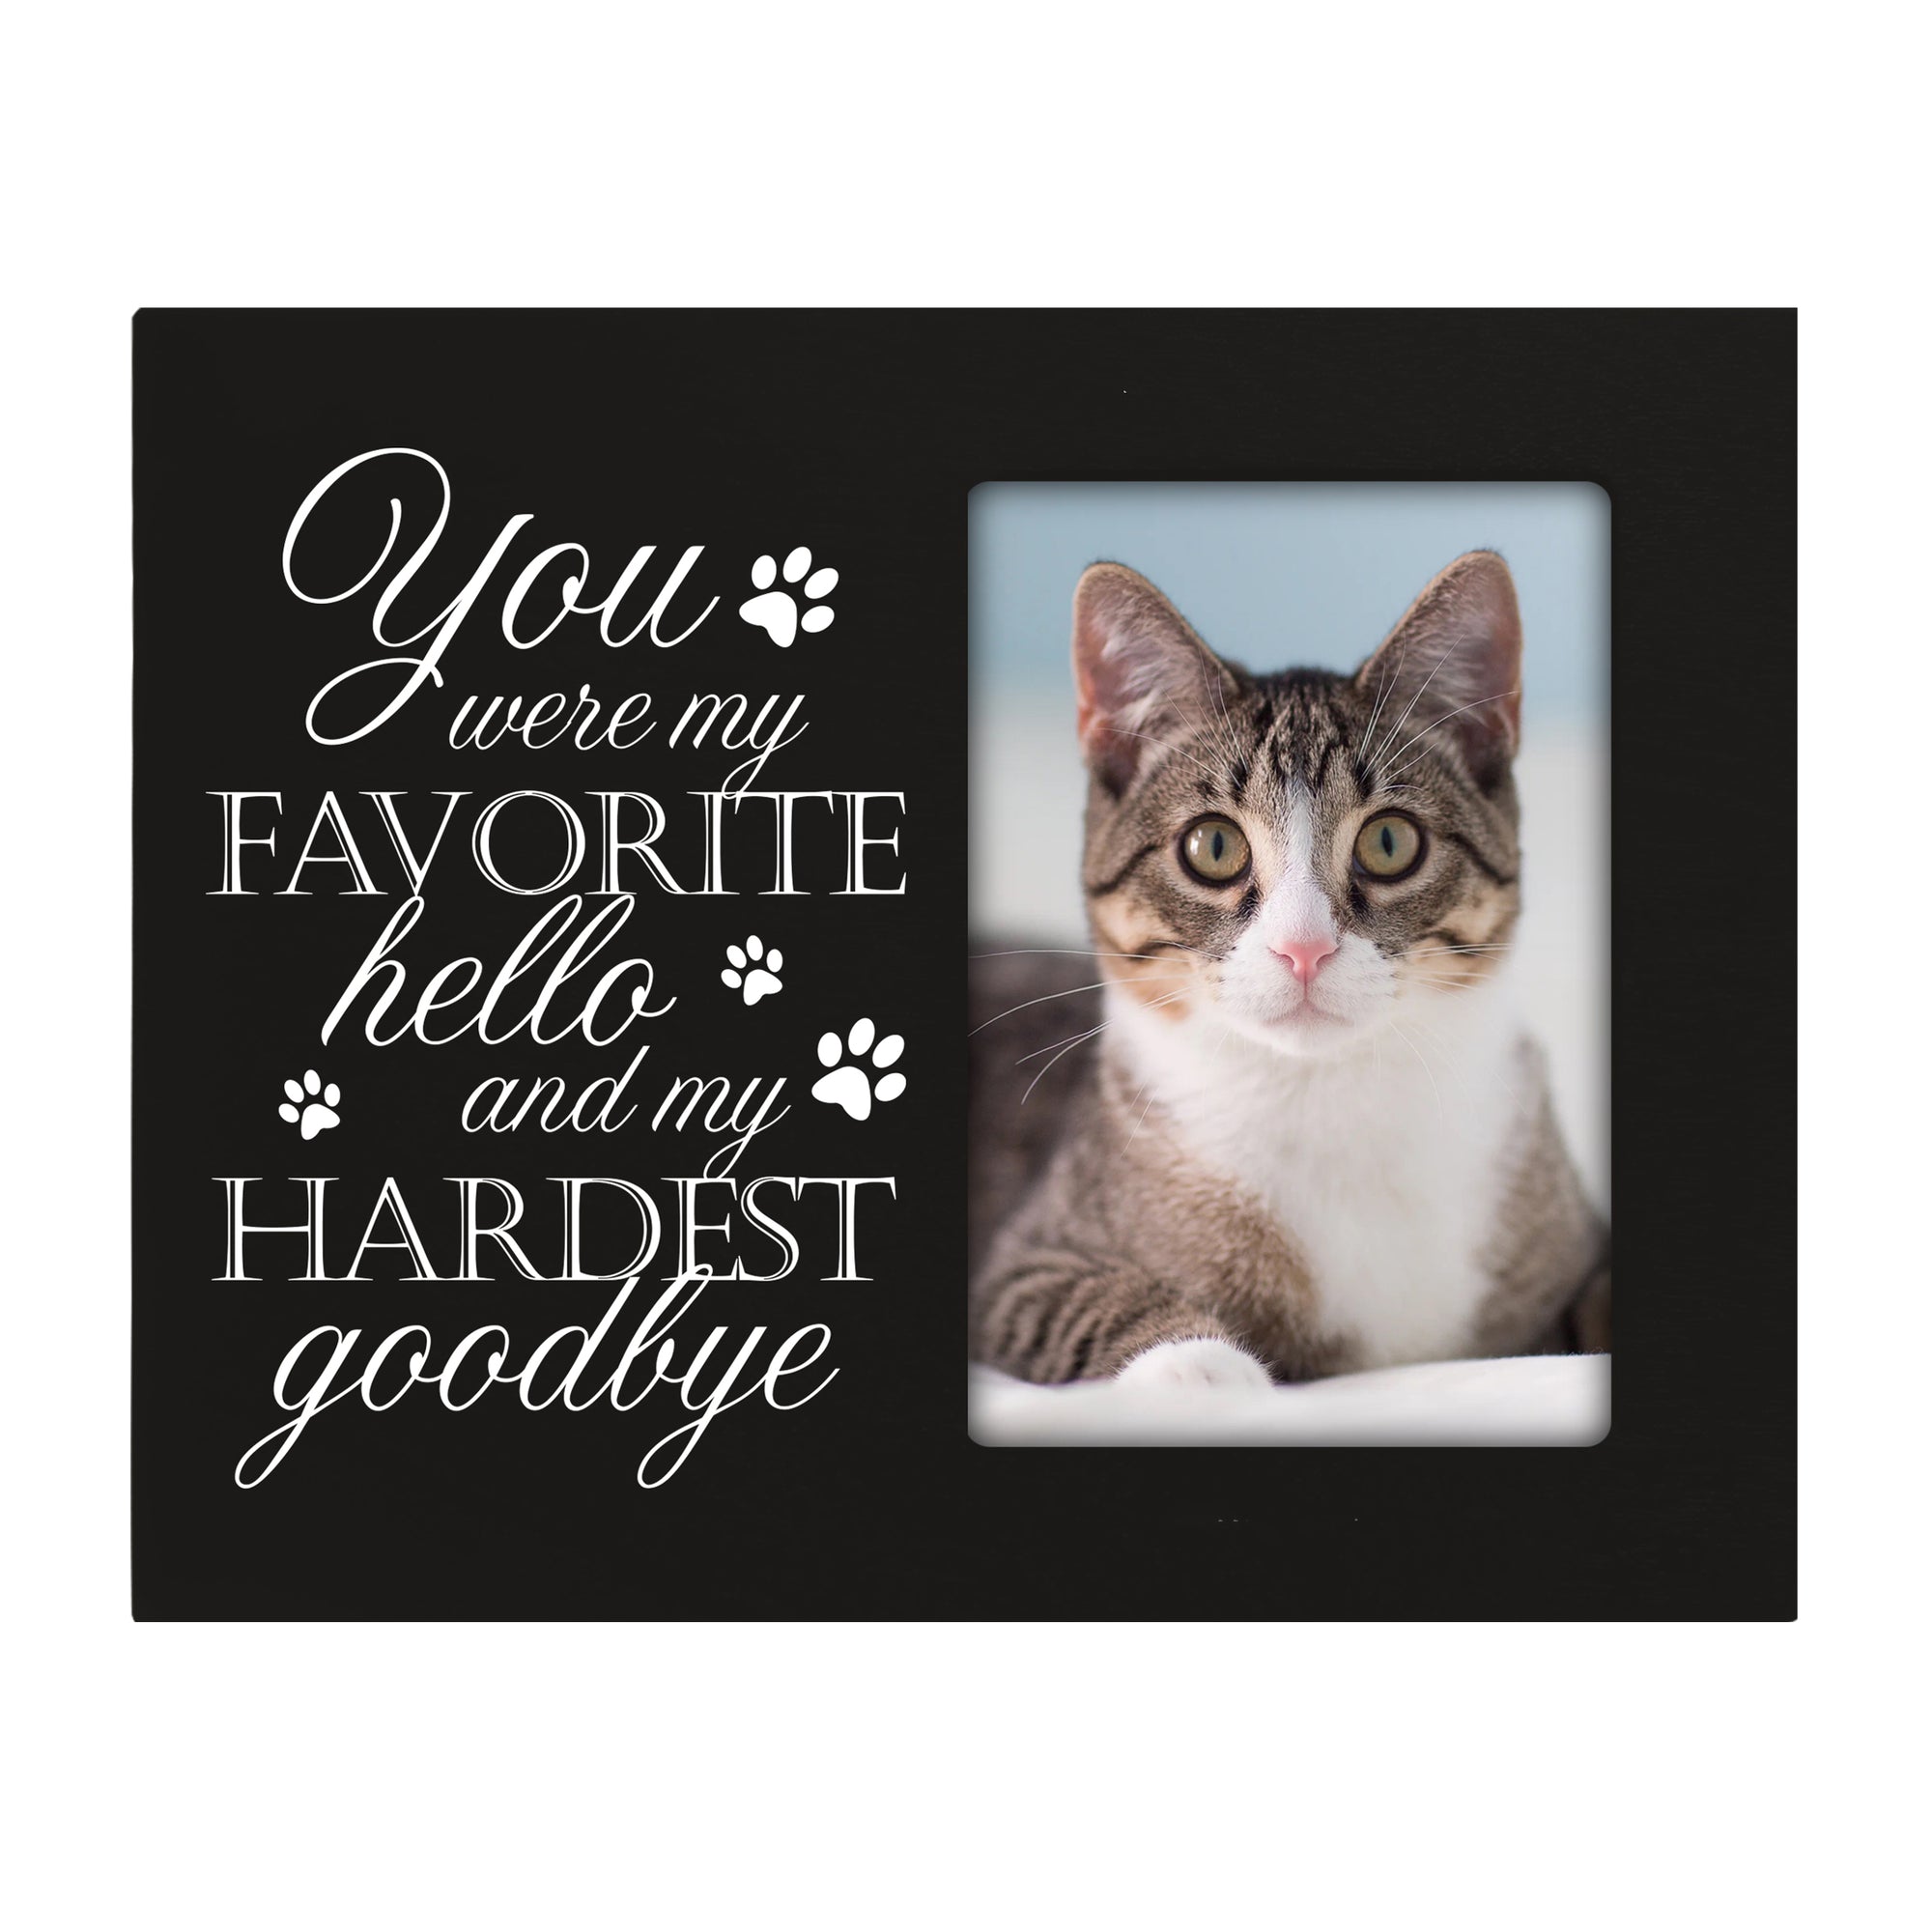 Rustic-Inspired Wooden Pet Memorial Frames That Holds A 4x6in Photo - You Were My Favorite (Paws)